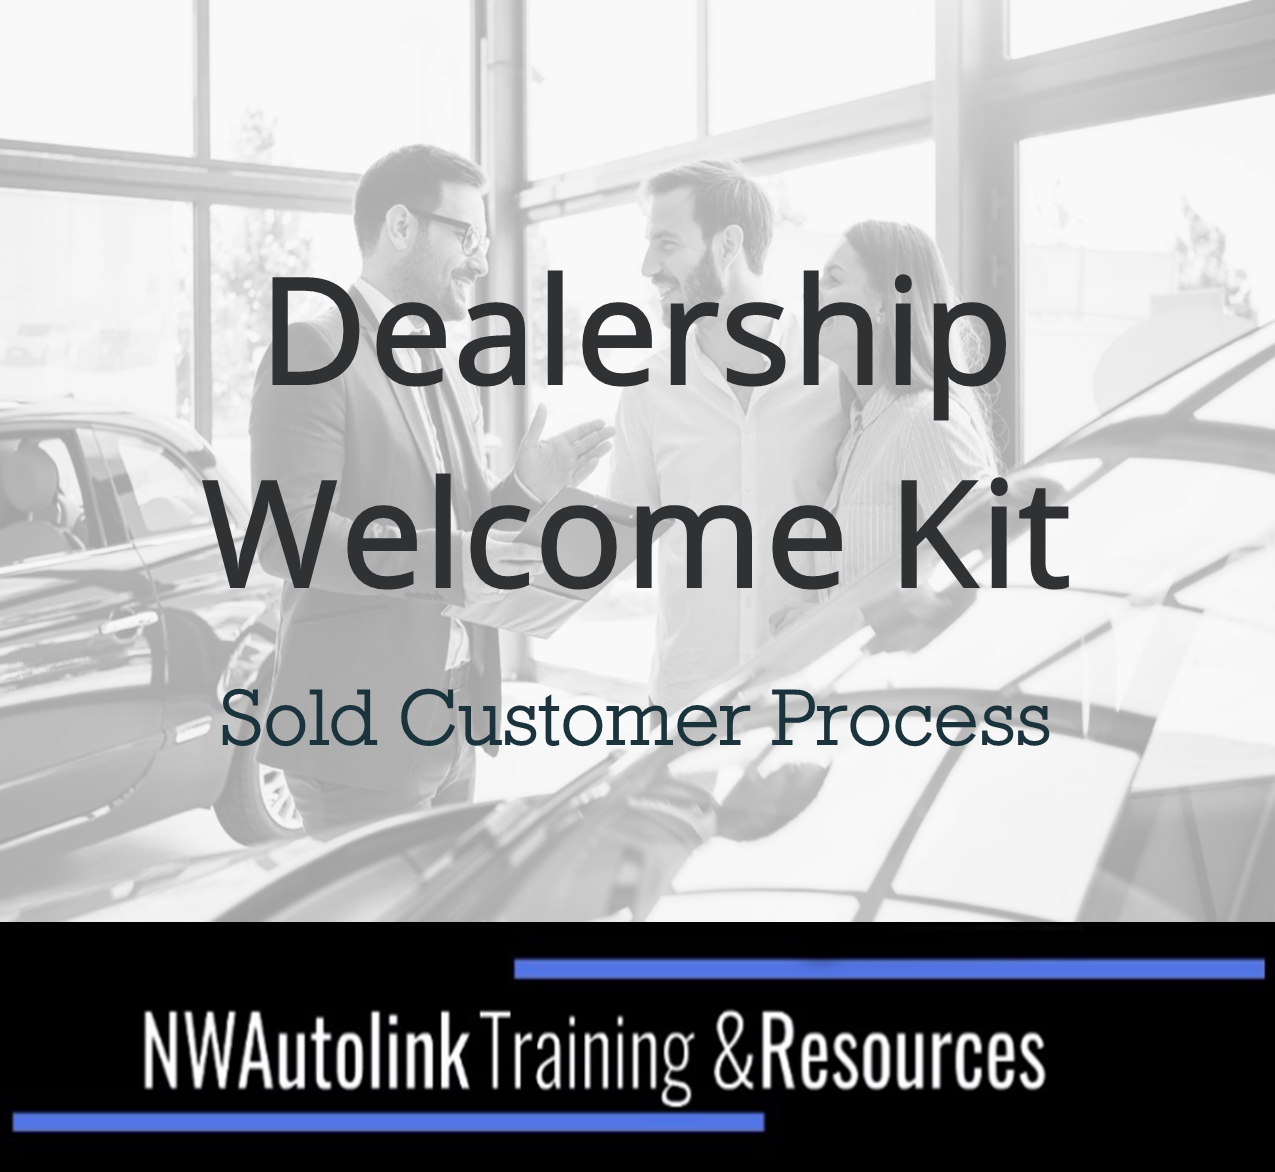 Dealership Welcome Kit – Sold Customer Process